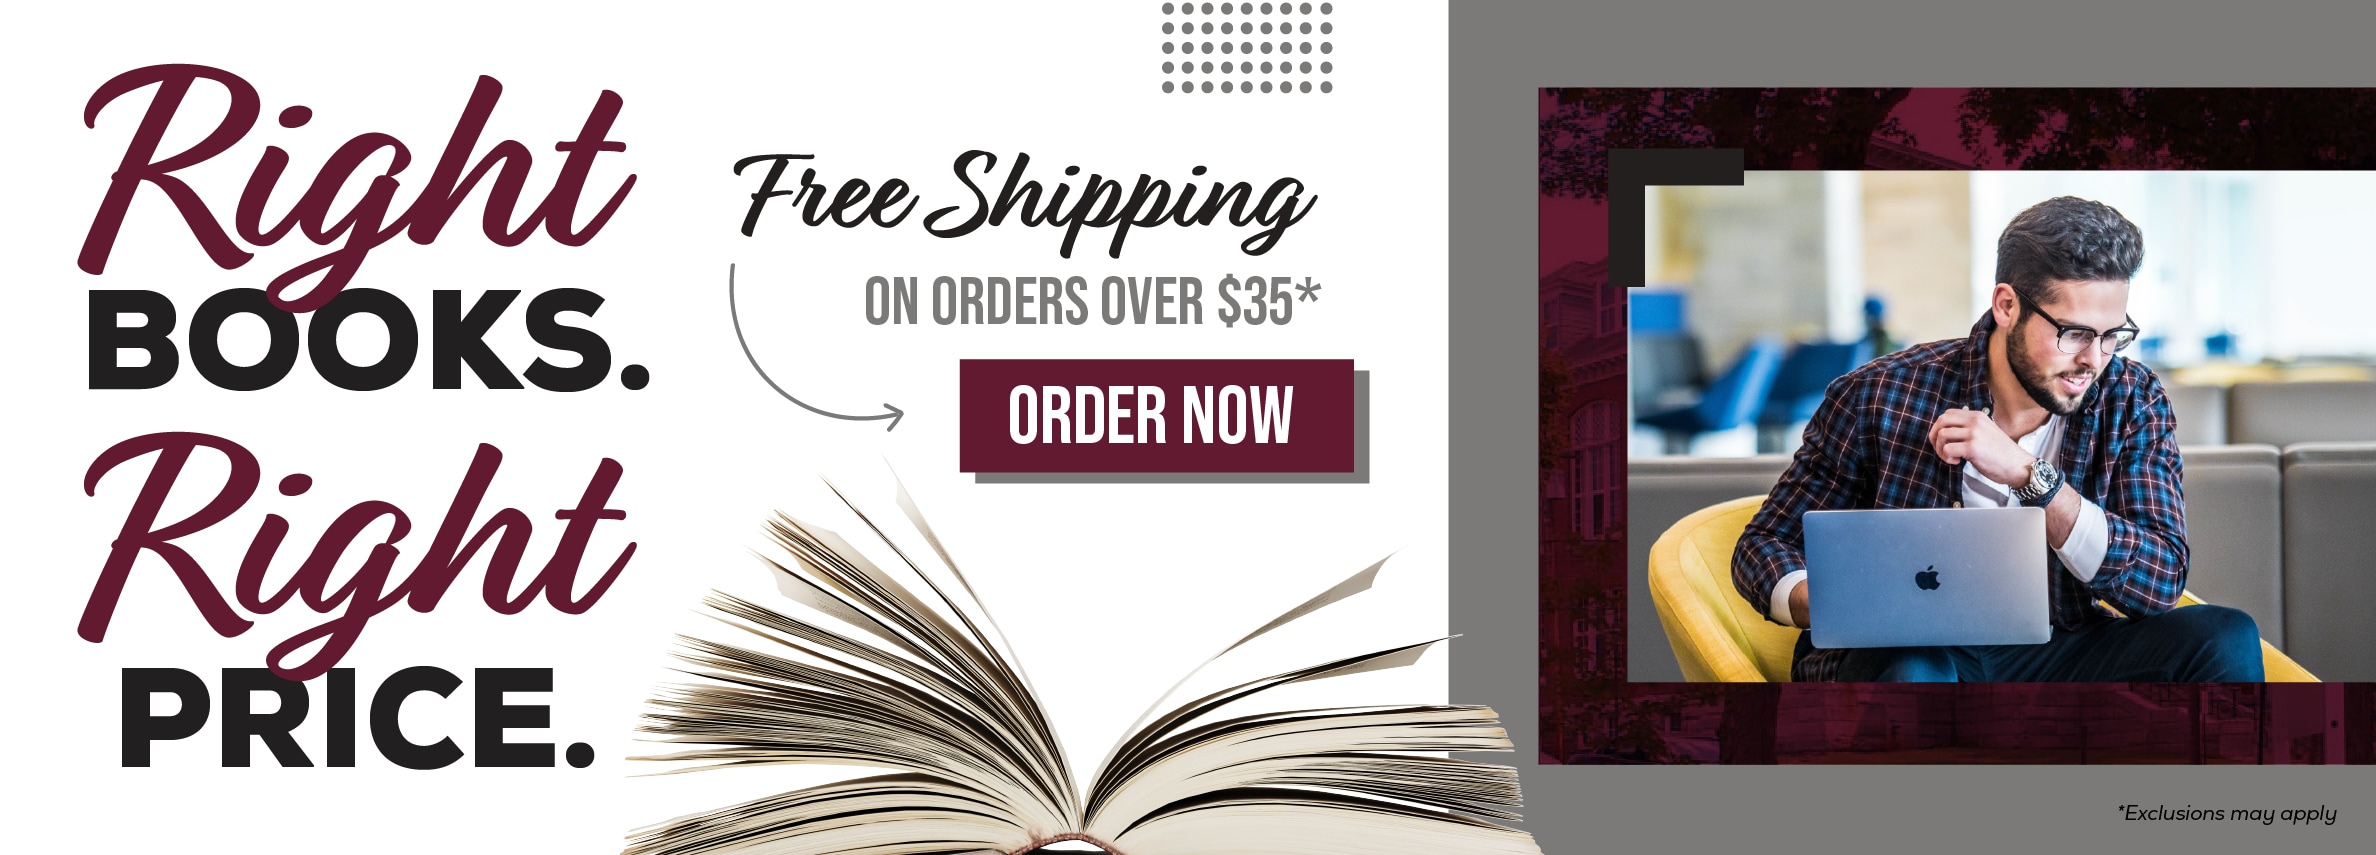 Right books. Right price. Free shipping on orders over $35* Order now. *Exclusions may apply.